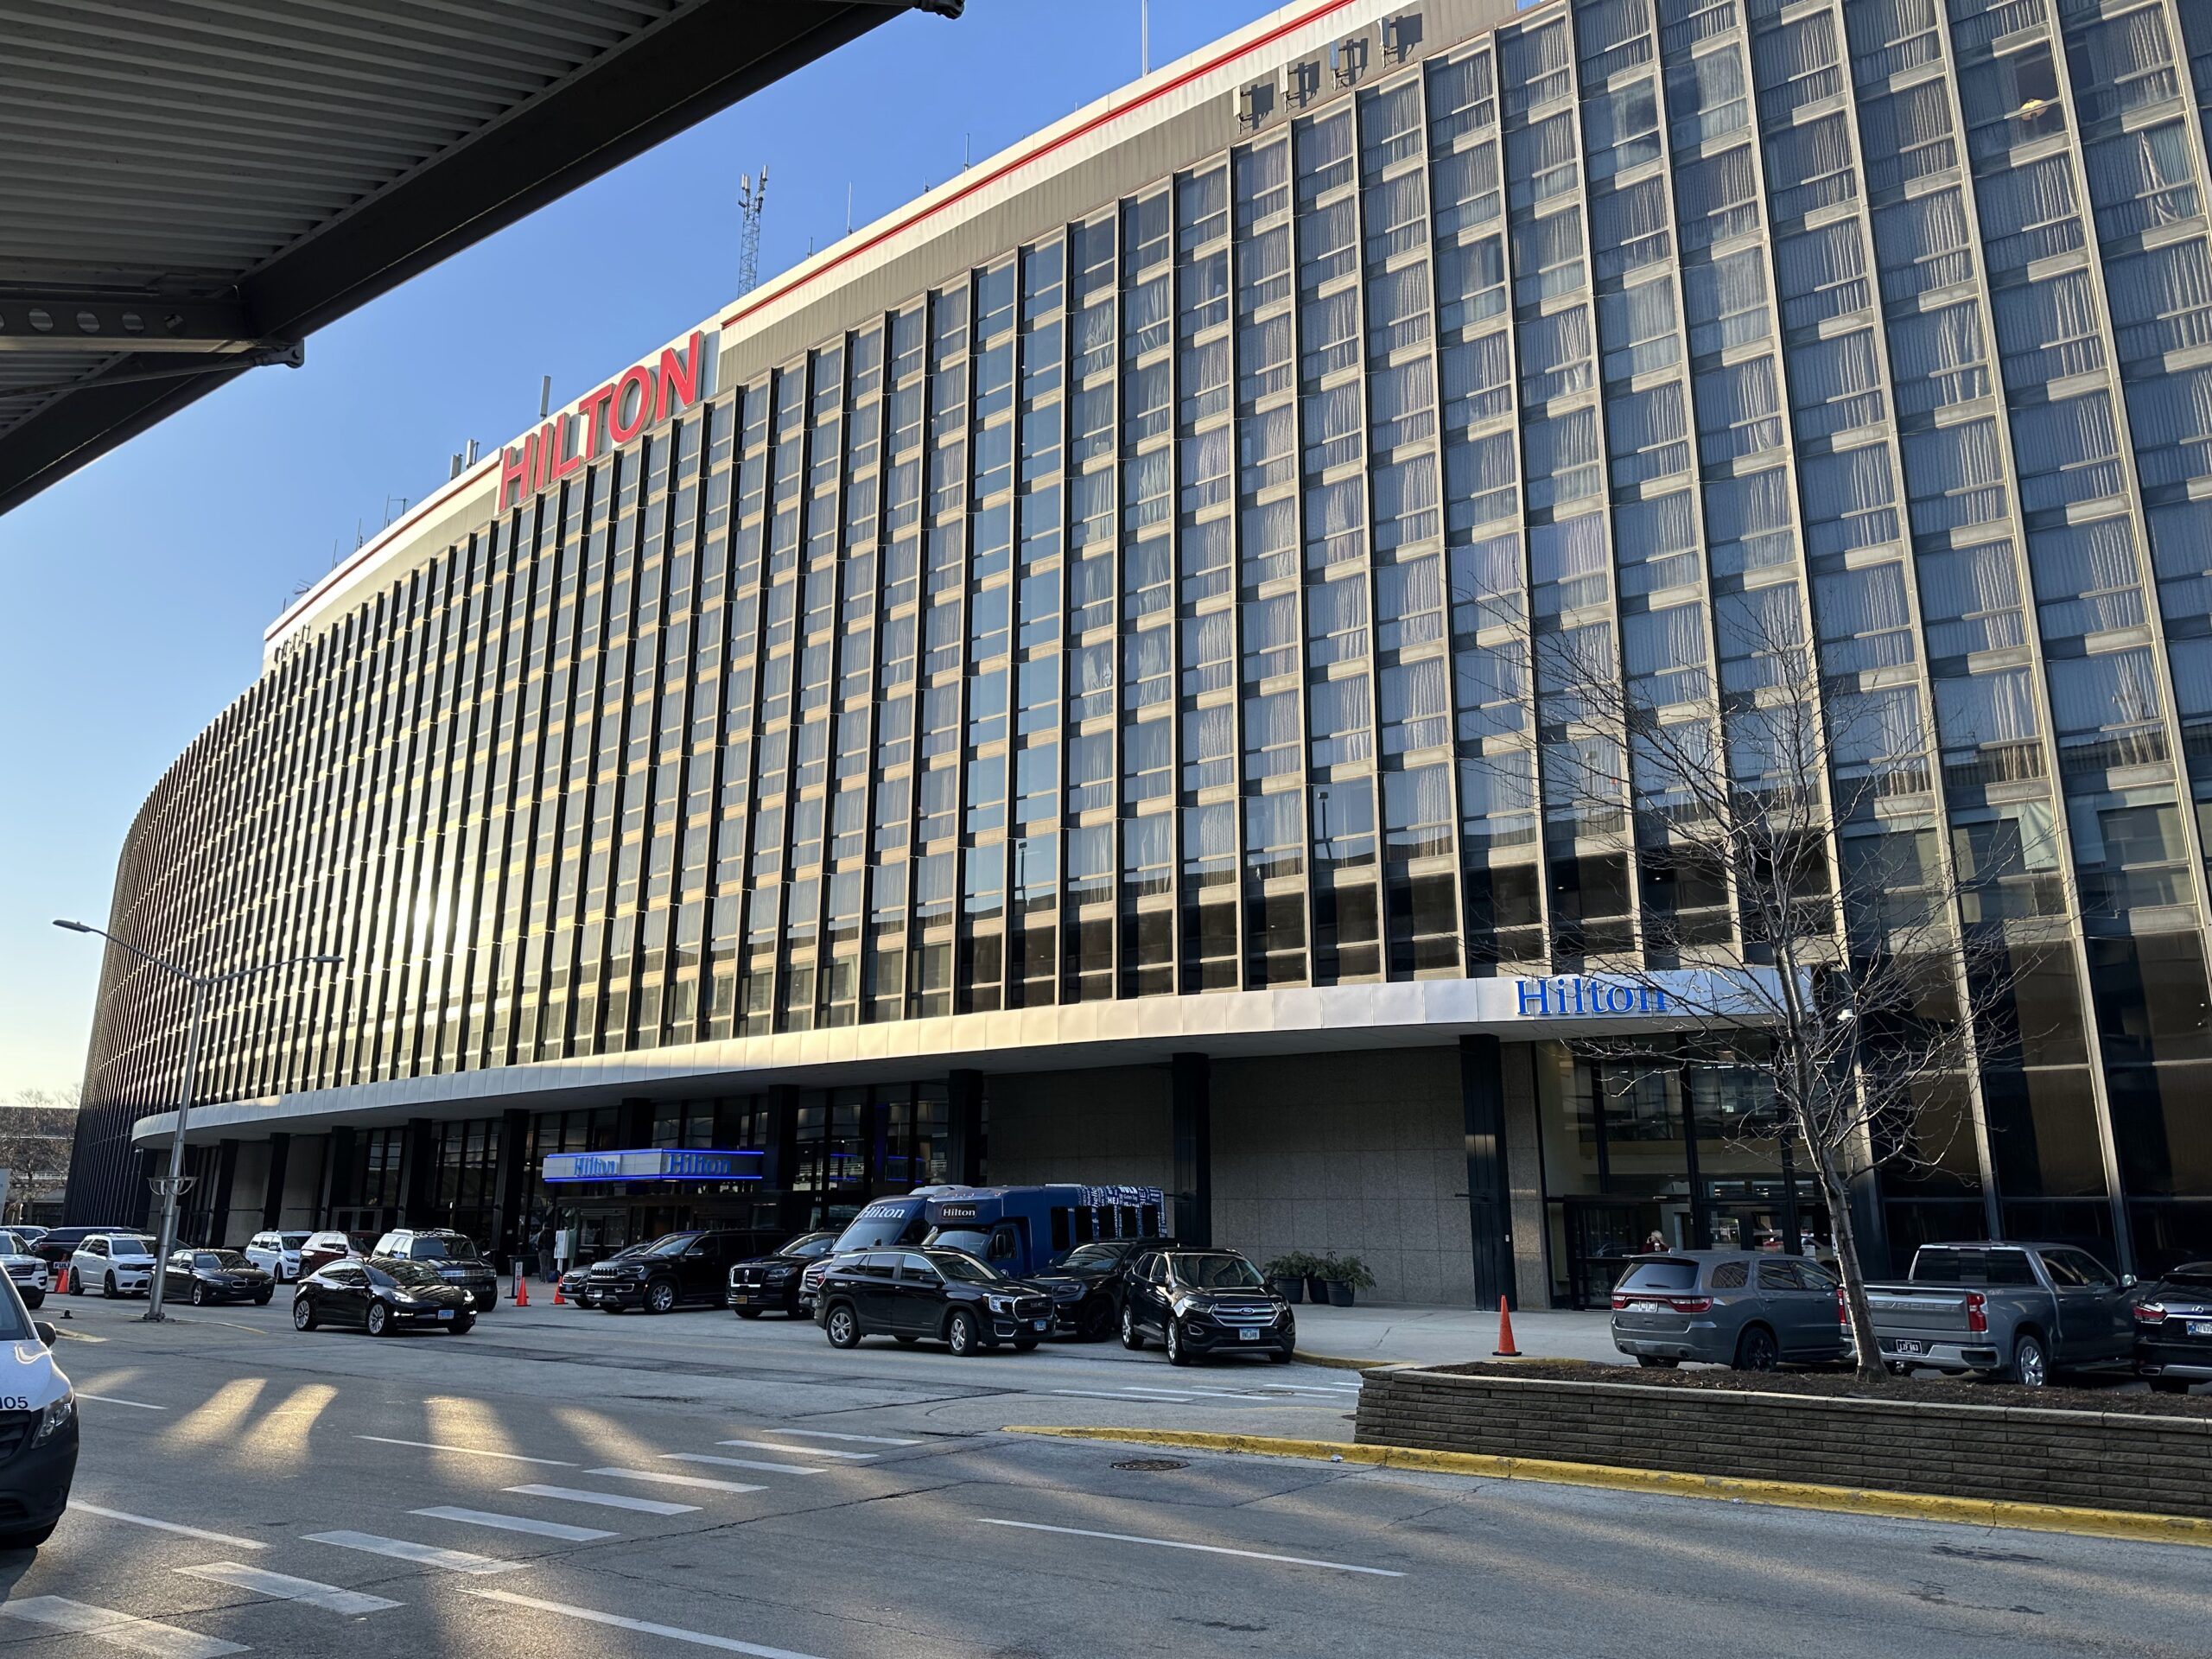 A Personal Review of the Hilton Chicago O'Hare Airport Hotel